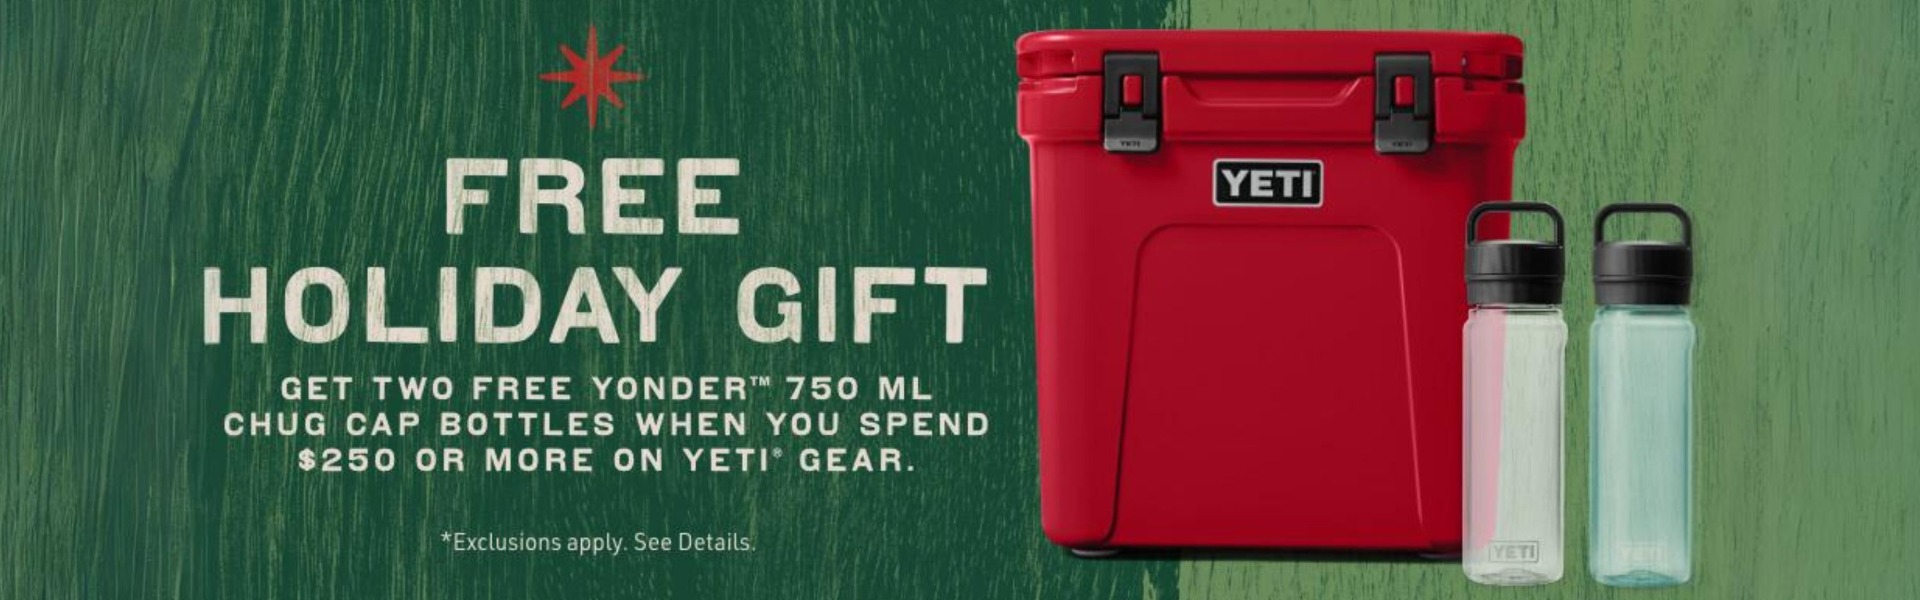 Get a free holiday gift when you spend $250 or more on Yeti gear. Exclusions apply. See details.